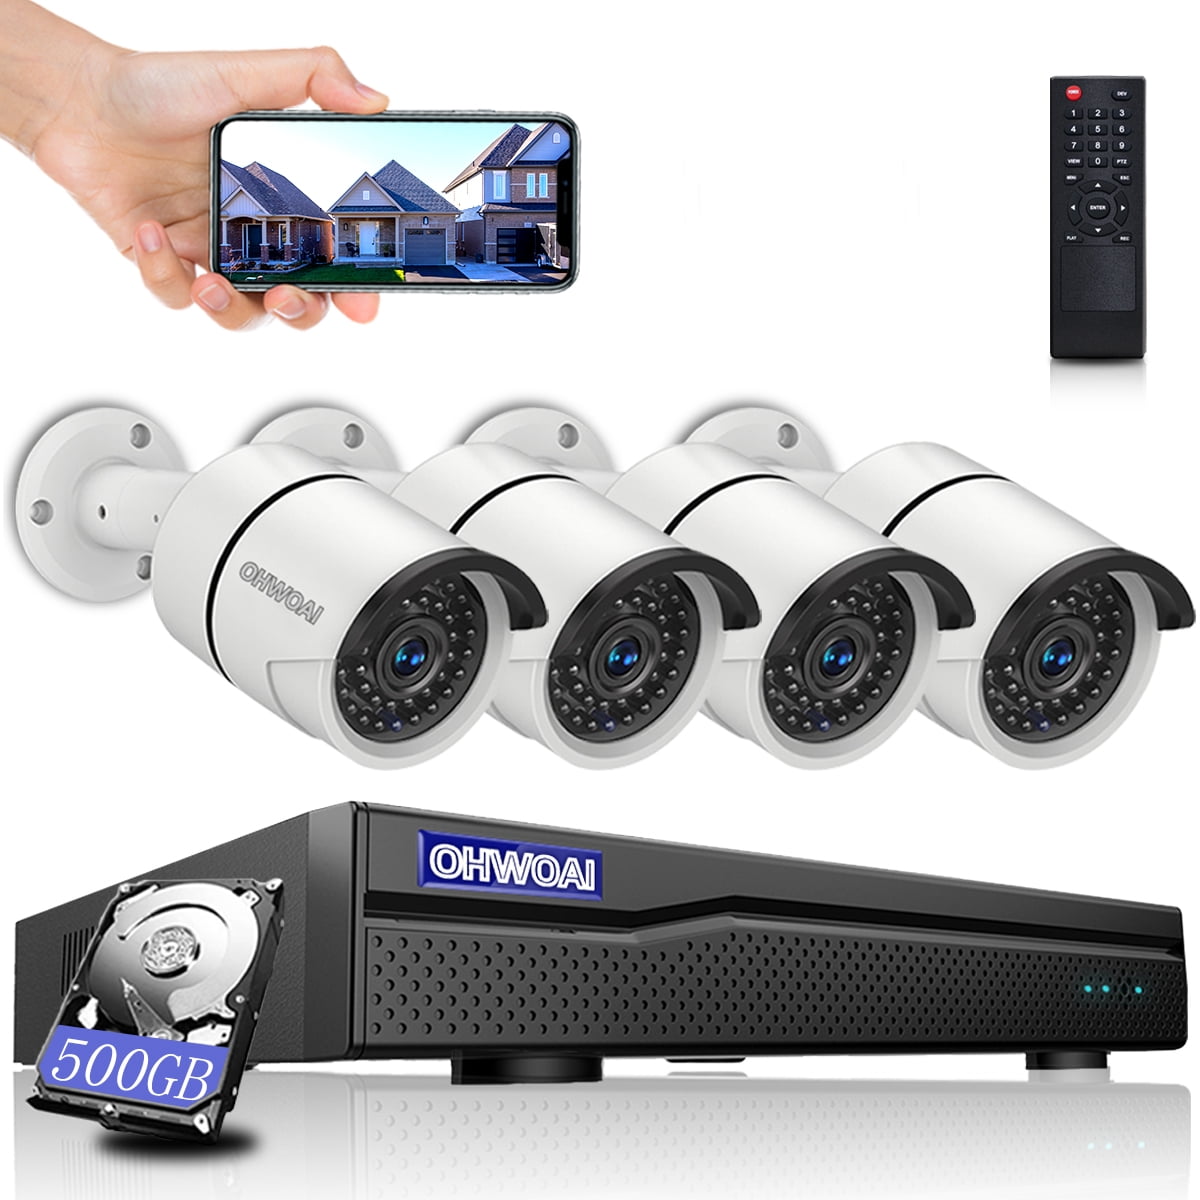 4MP NVR with 4pcs Outdoor 4MP PoE Cameras PC/Mobile Remote Access PoE IP Security System Motion Detection Night Vision Support Audio 1TB Hard Drive Pre-Installed for 24/7 Recording and Playback 